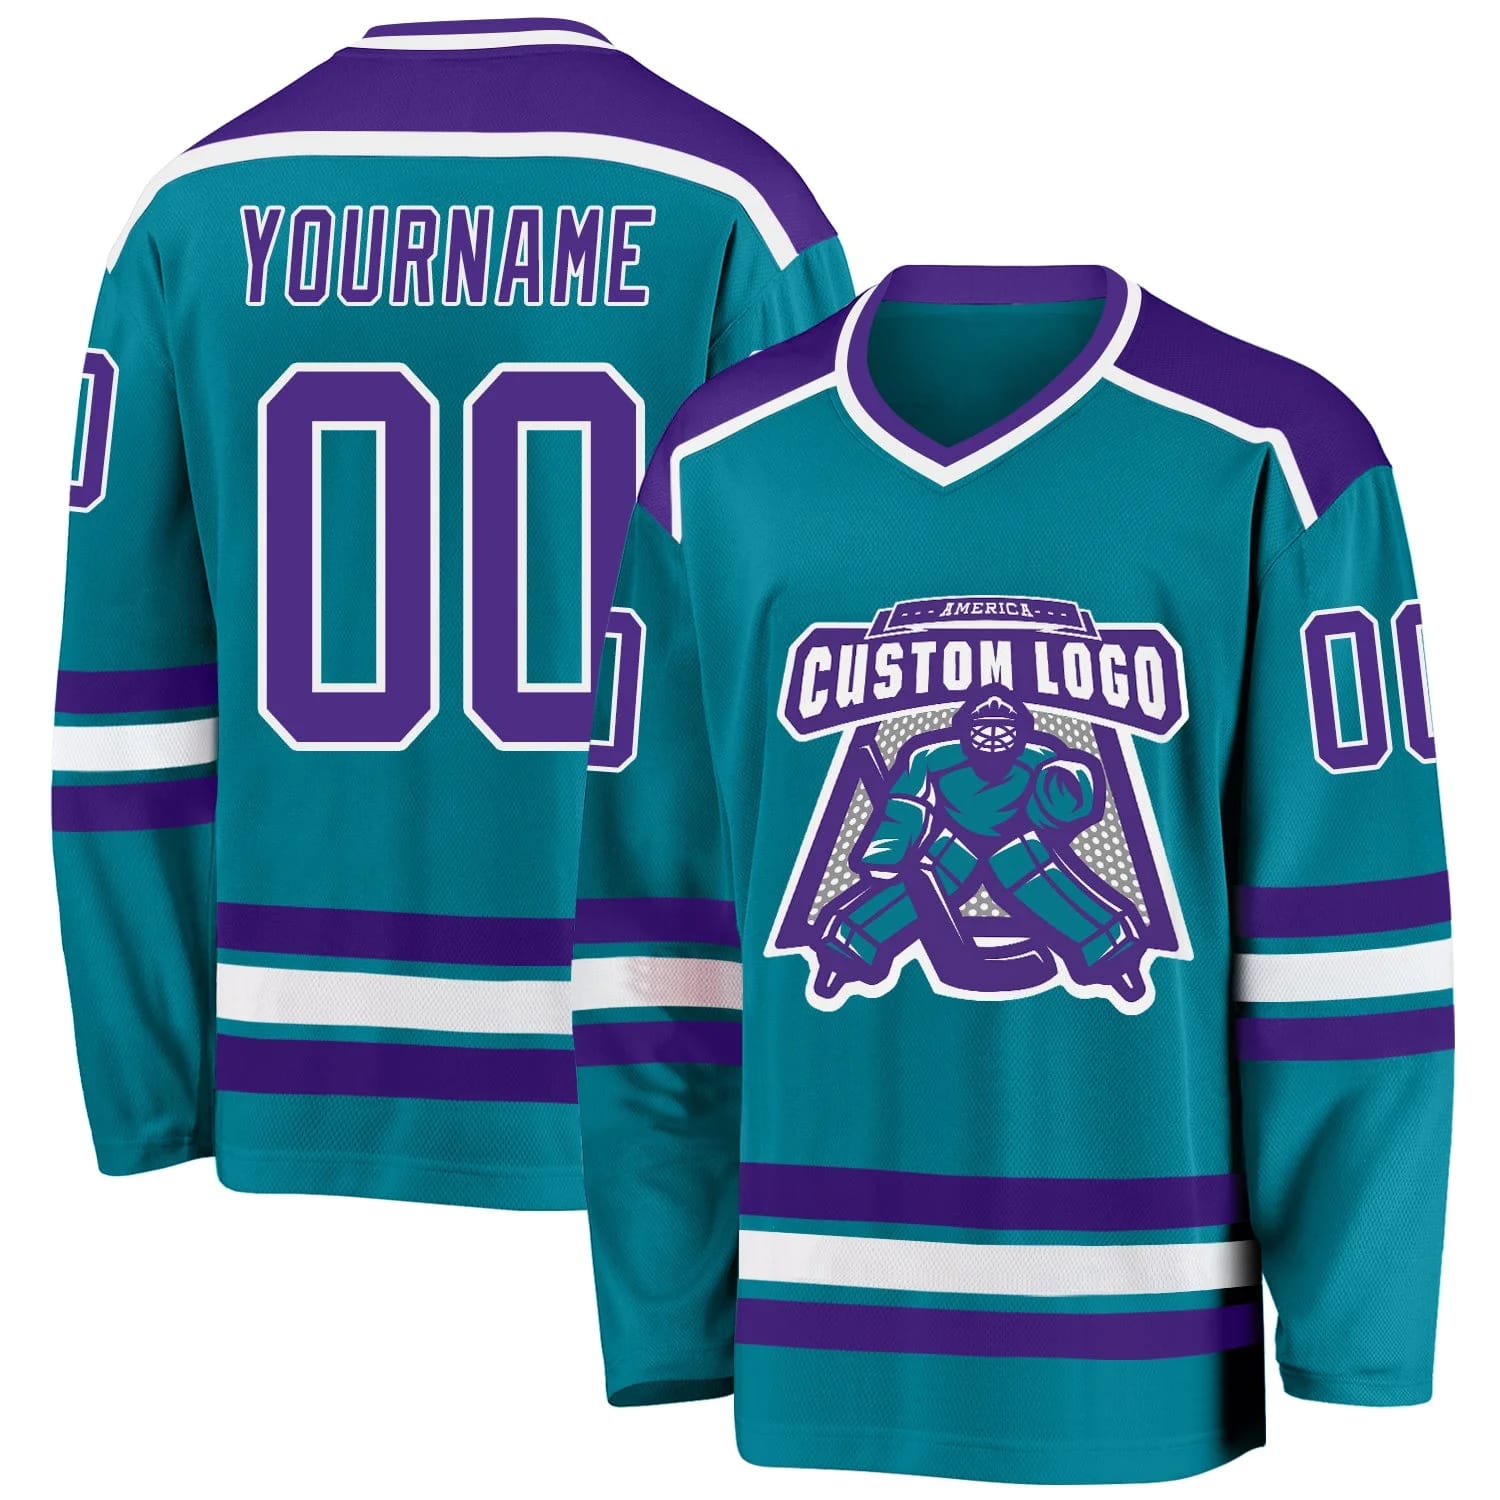 Stitched And Print Teal Purple-white Hockey Jersey Custom